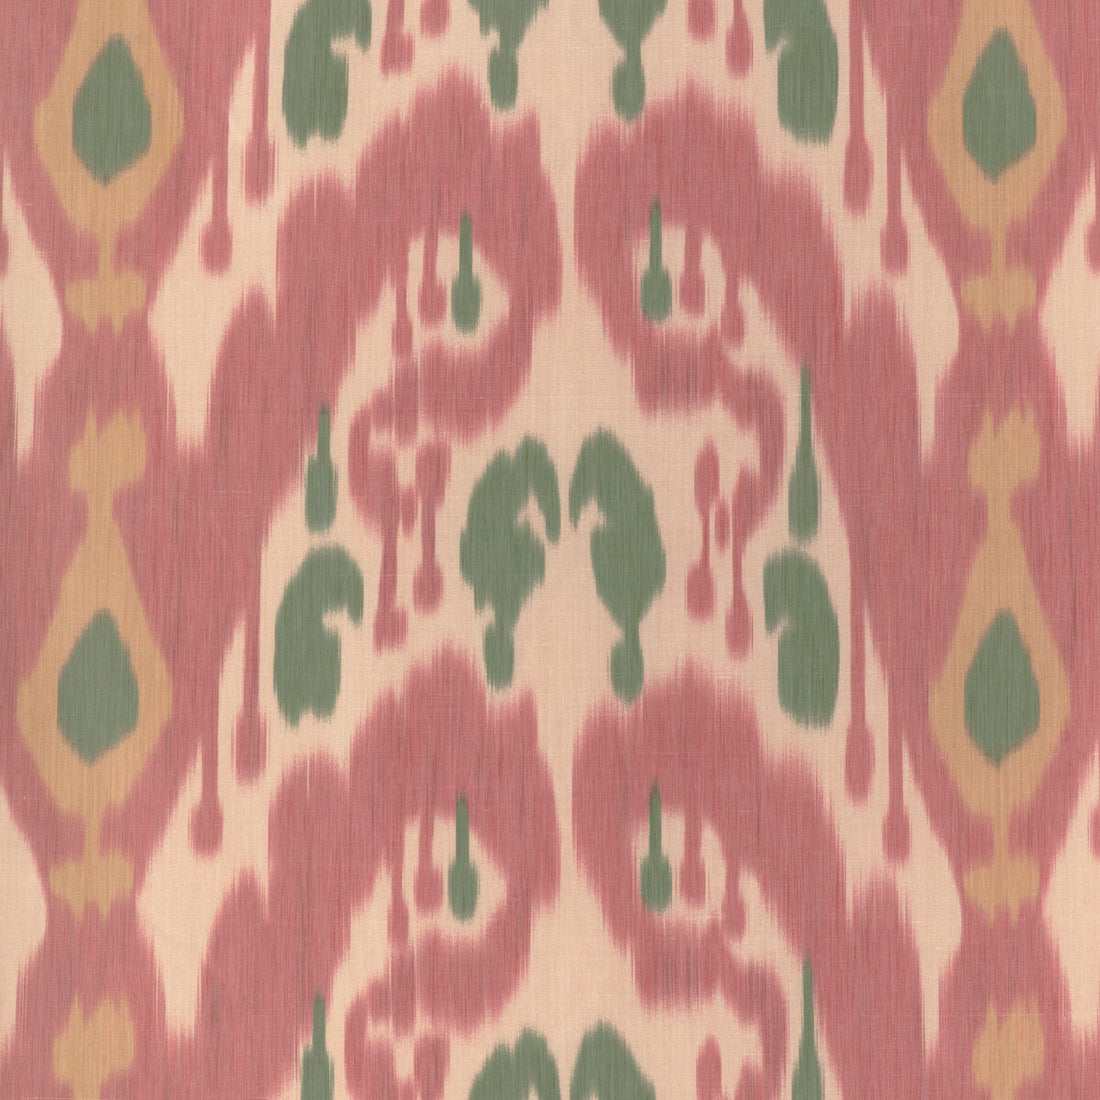 Bukara Warp Print fabric in petal color - pattern 8023146.73.0 - by Brunschwig &amp; Fils in the Vienne Silks collection